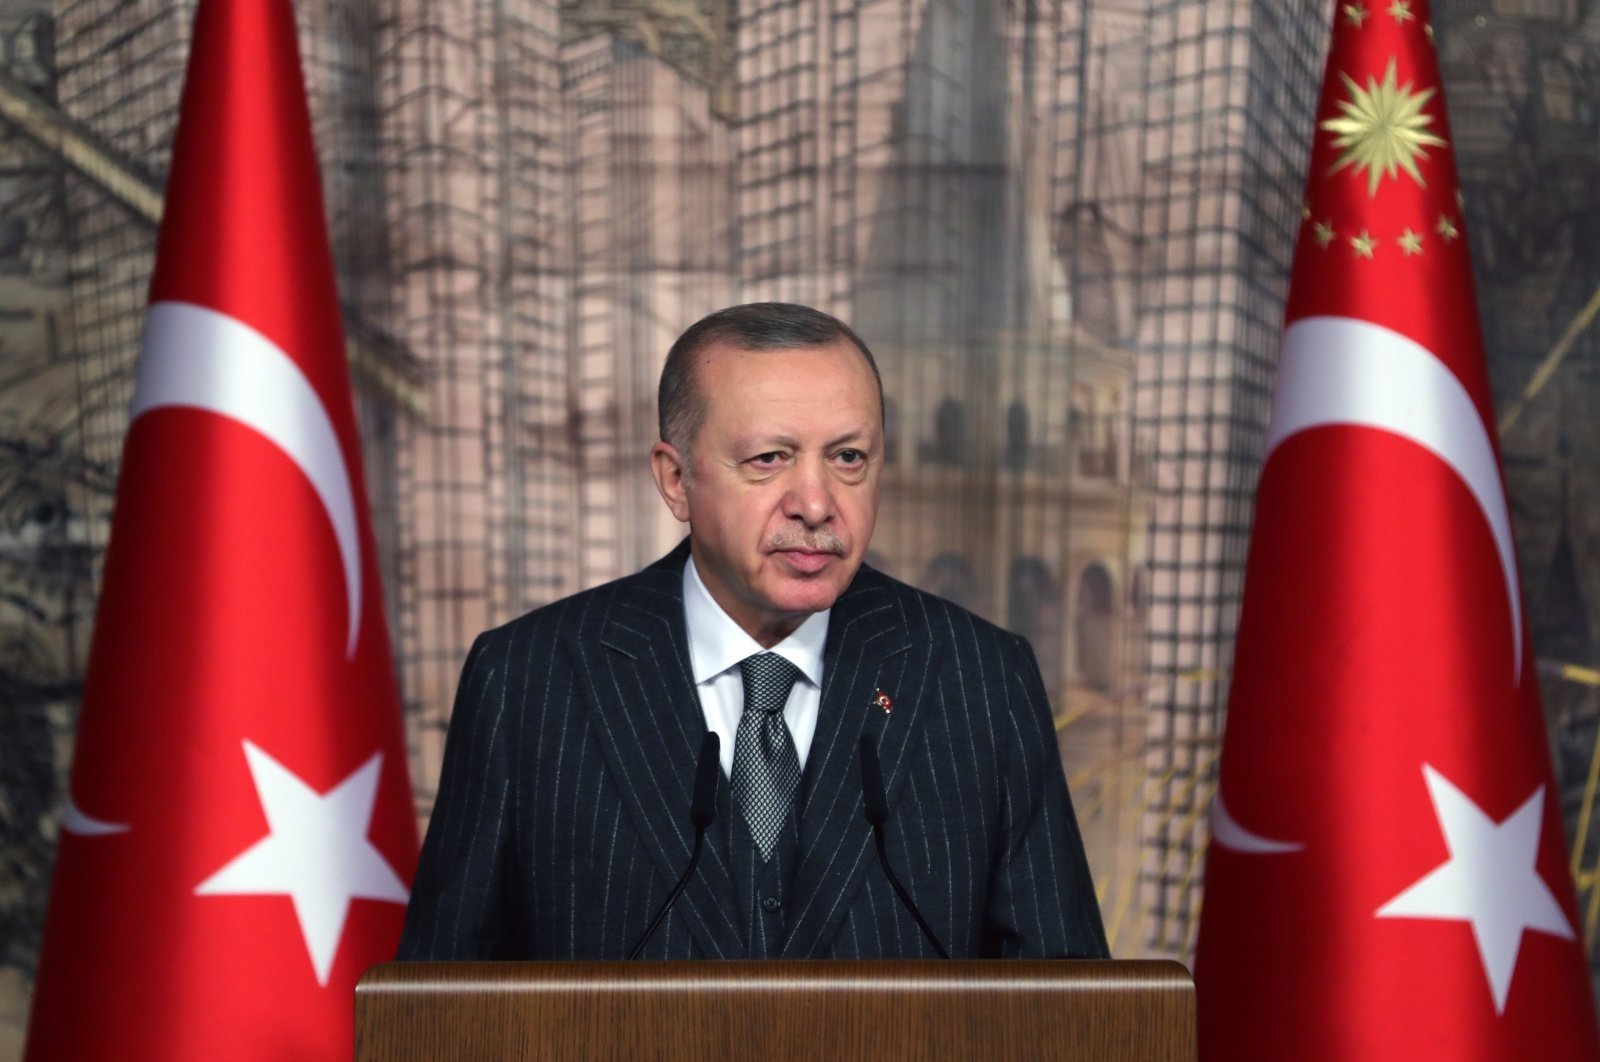 President Recep Tayyip Erdoğan speaks at a news conference in Istanbul, Turkey in this undated file photo. (AA File Photo)